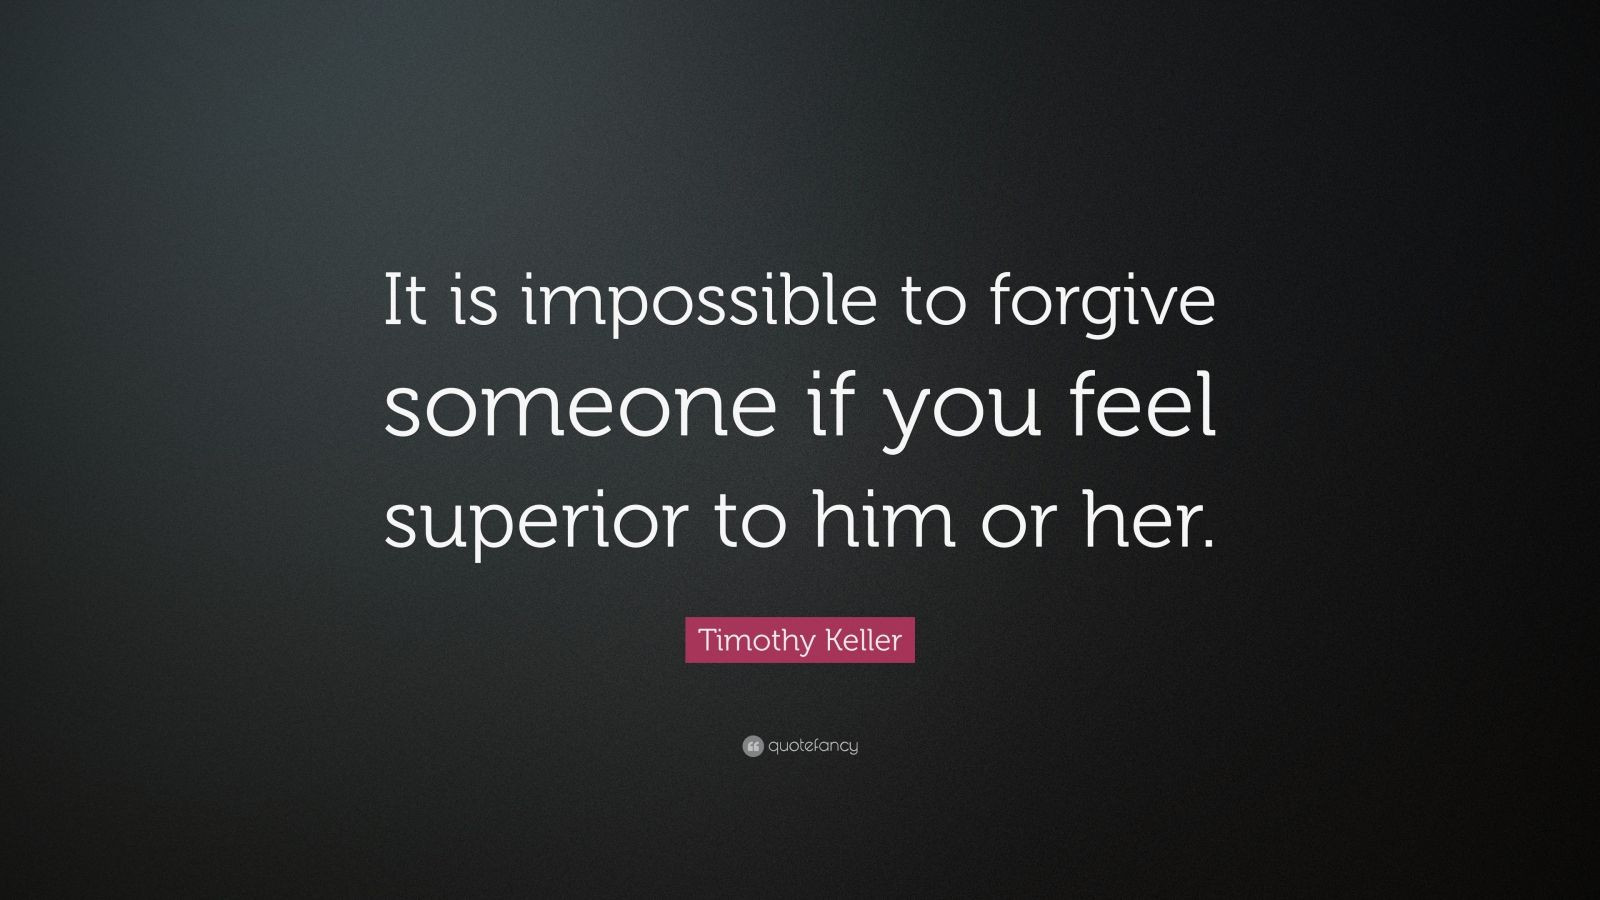 Tim Keller Marriage Quotes
 Timothy Keller Quote “It is impossible to forgive someone